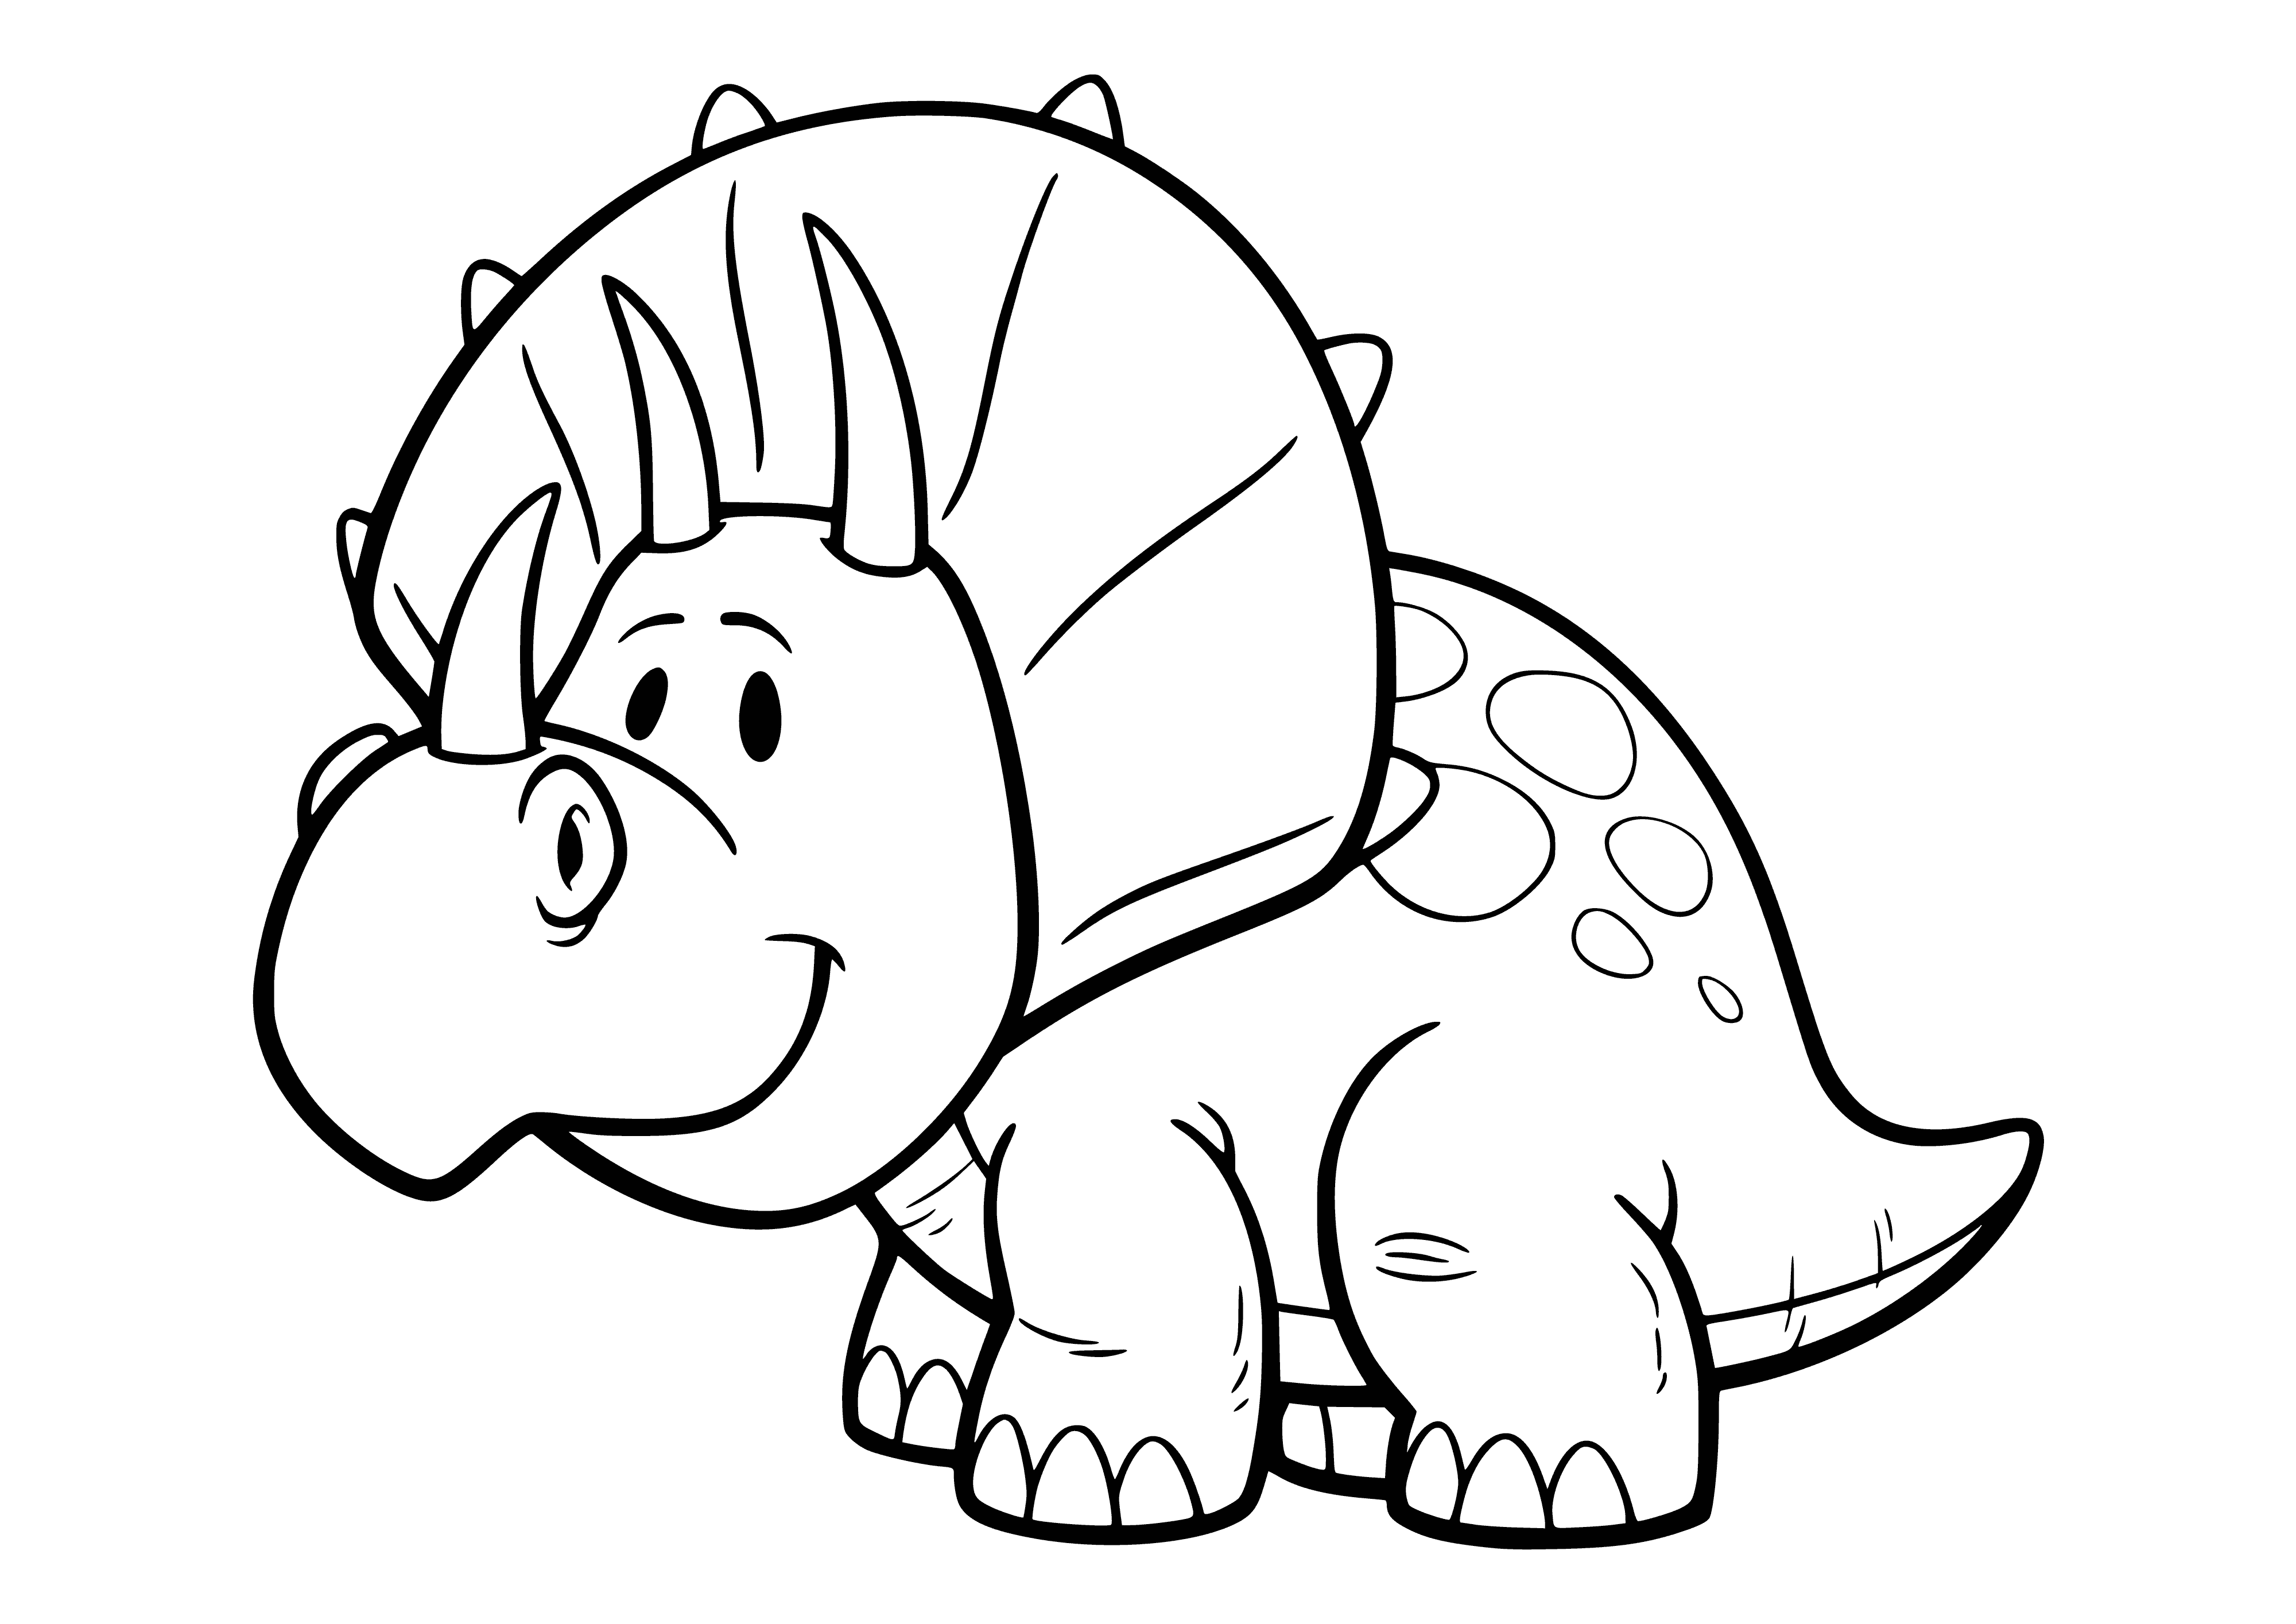 coloring page: Baby triceratops was a herbivore with 3 horns, armor plates on its back, lived during Cretaceous period.